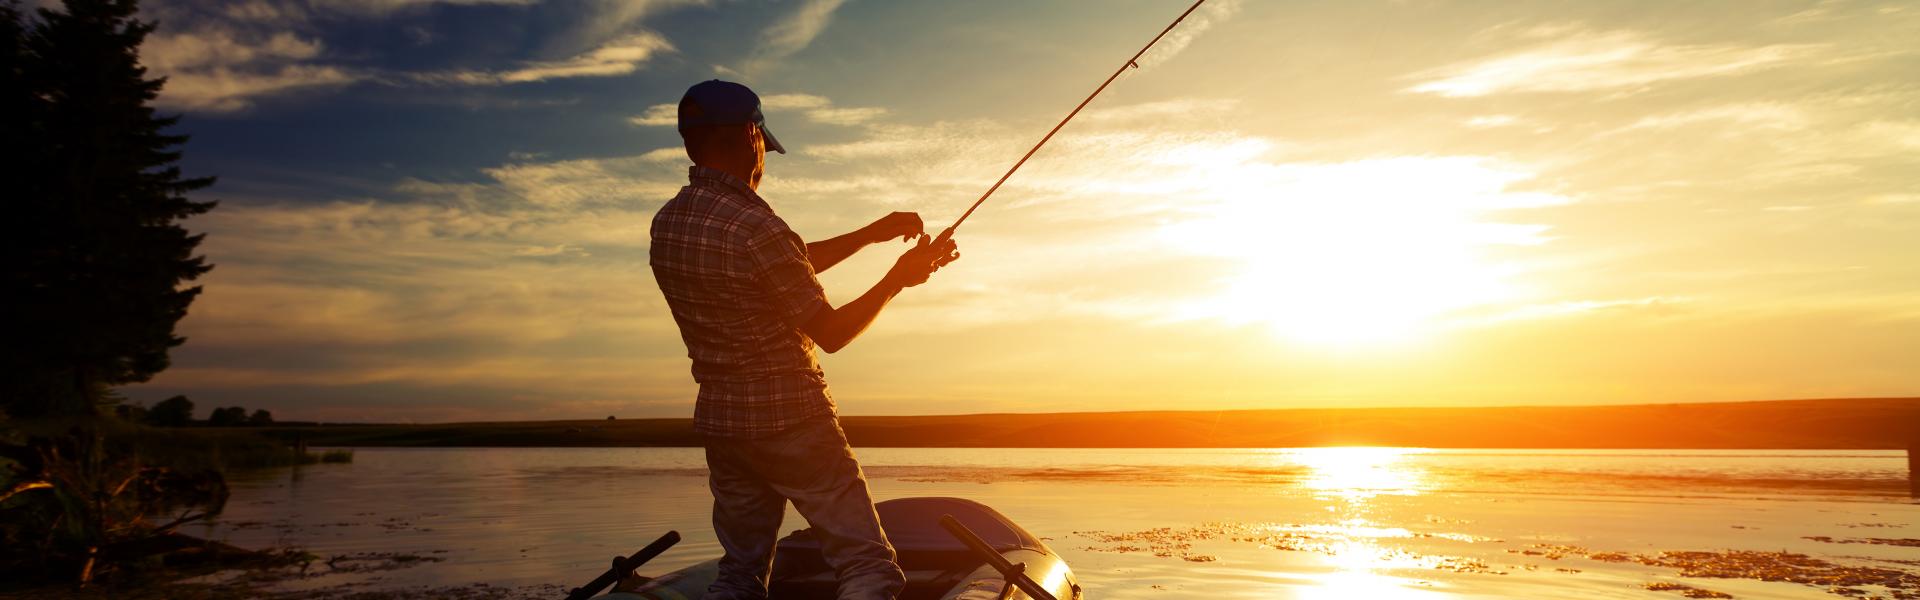 Fishing Holidays in Lincolnshire - HomeToGo